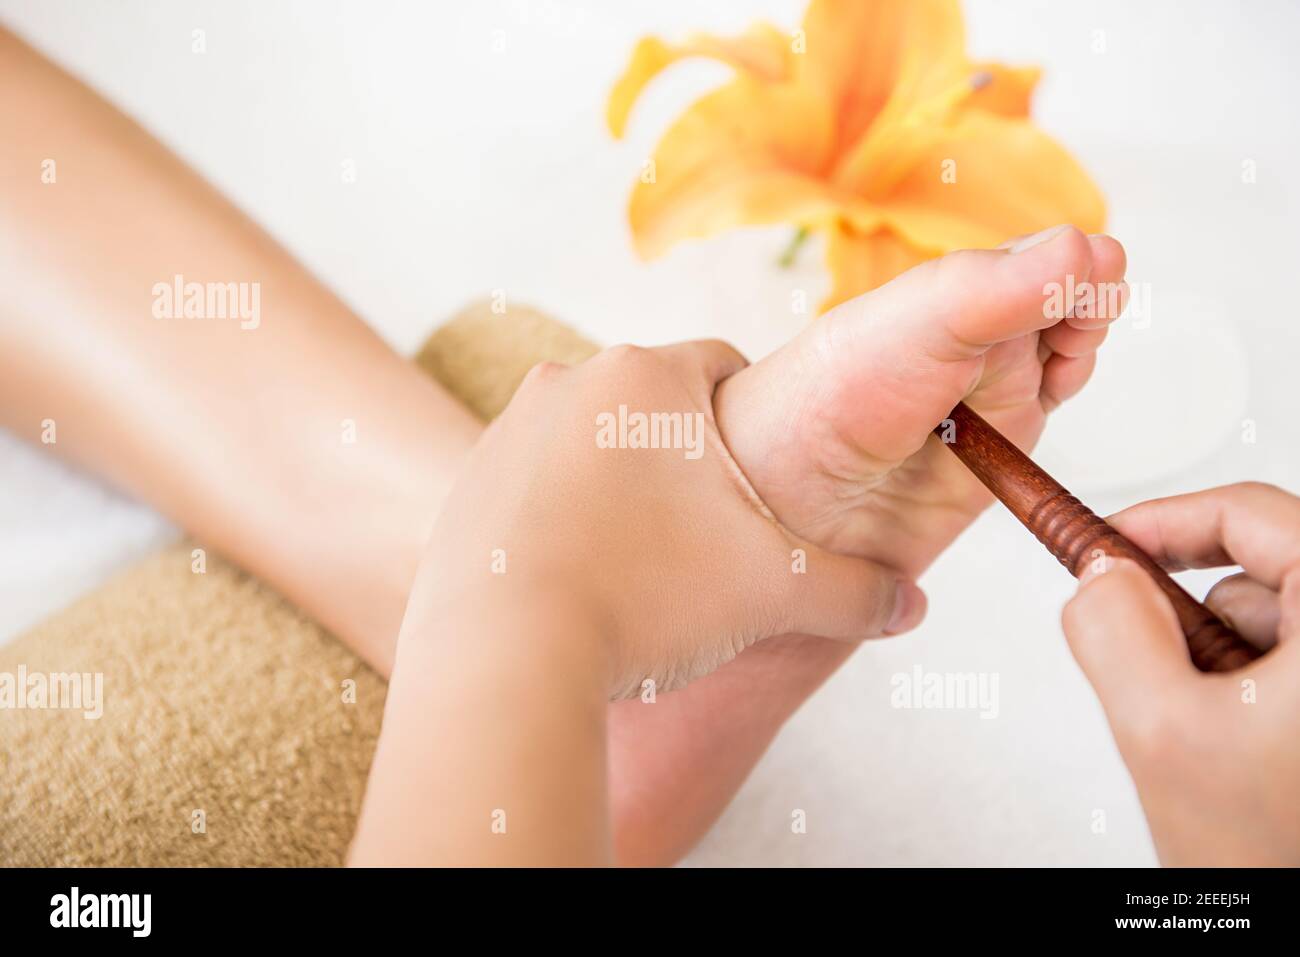 Professional therapist giving relaxing reflexology Thai foot massage with stick to a woman in spa Stock Photo